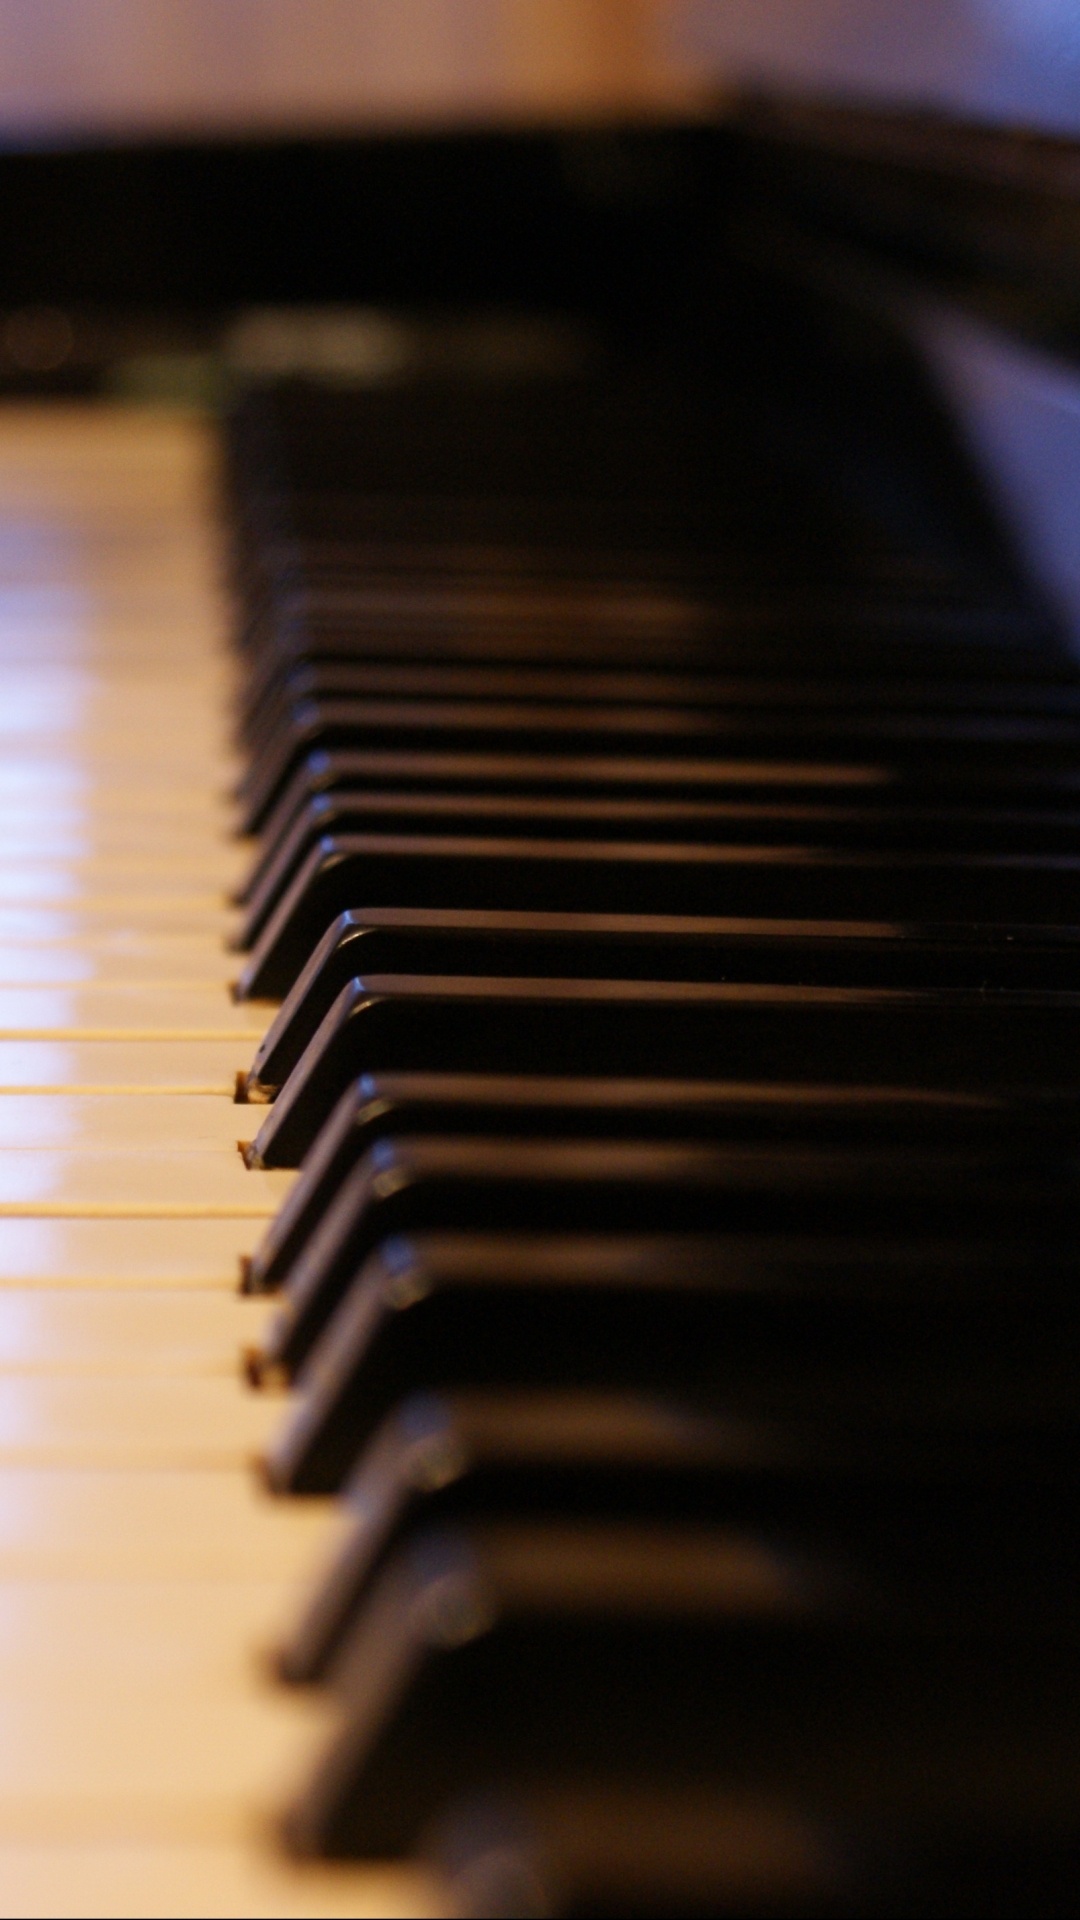 Piano: Chamber Music, Musical Keyboard, Vibrational Modes Of The Strings. 1080x1920 Full HD Wallpaper.